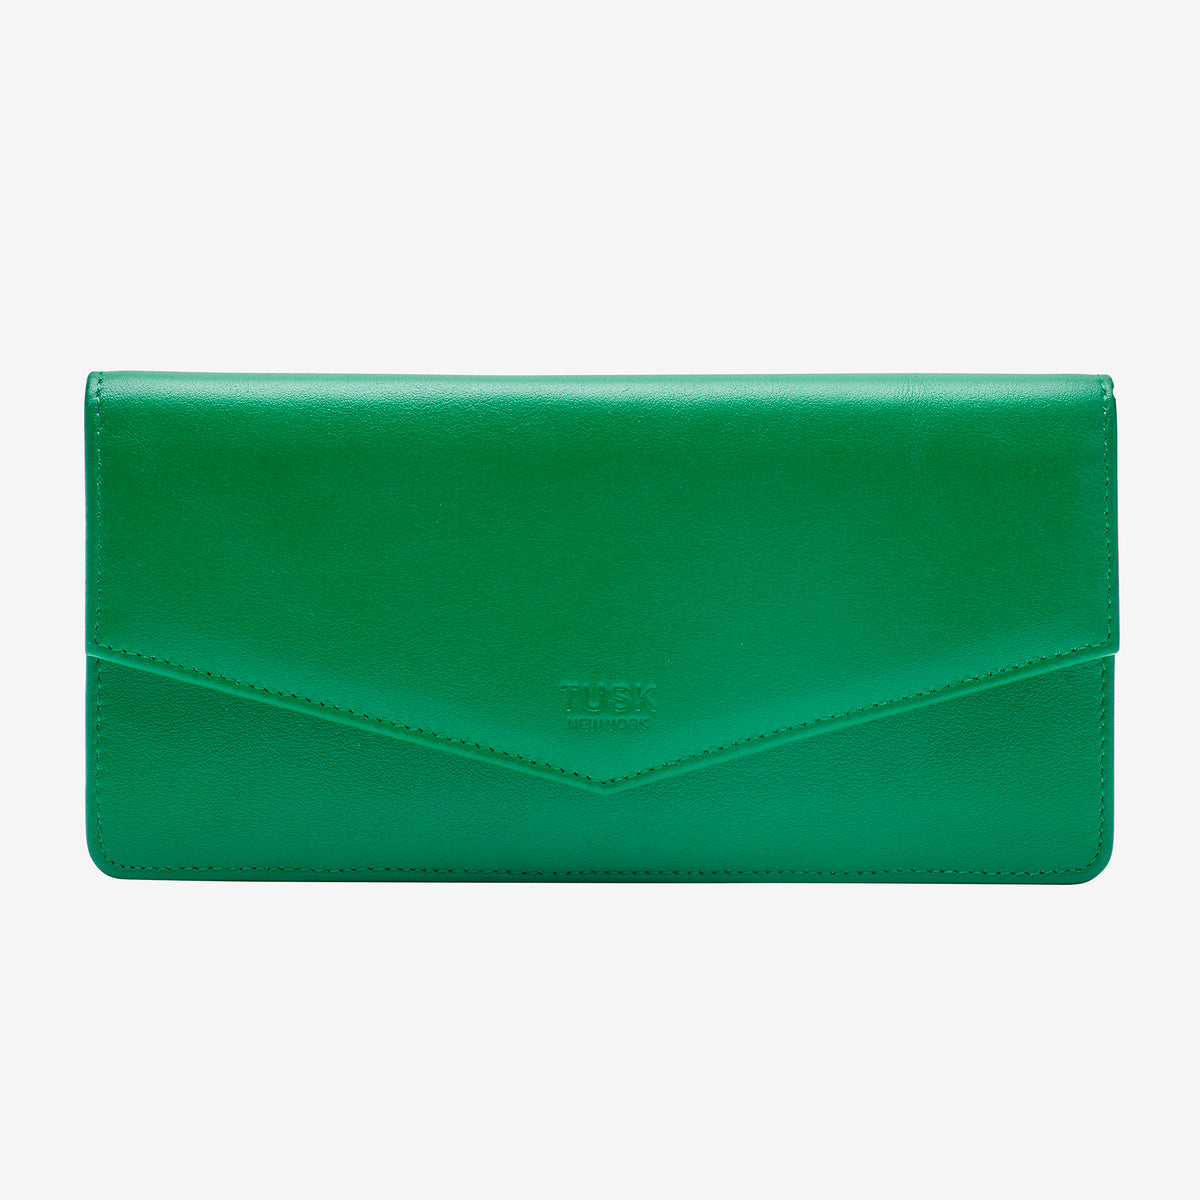     tusk-434-leather-clutch-wallet-emerald-fronT